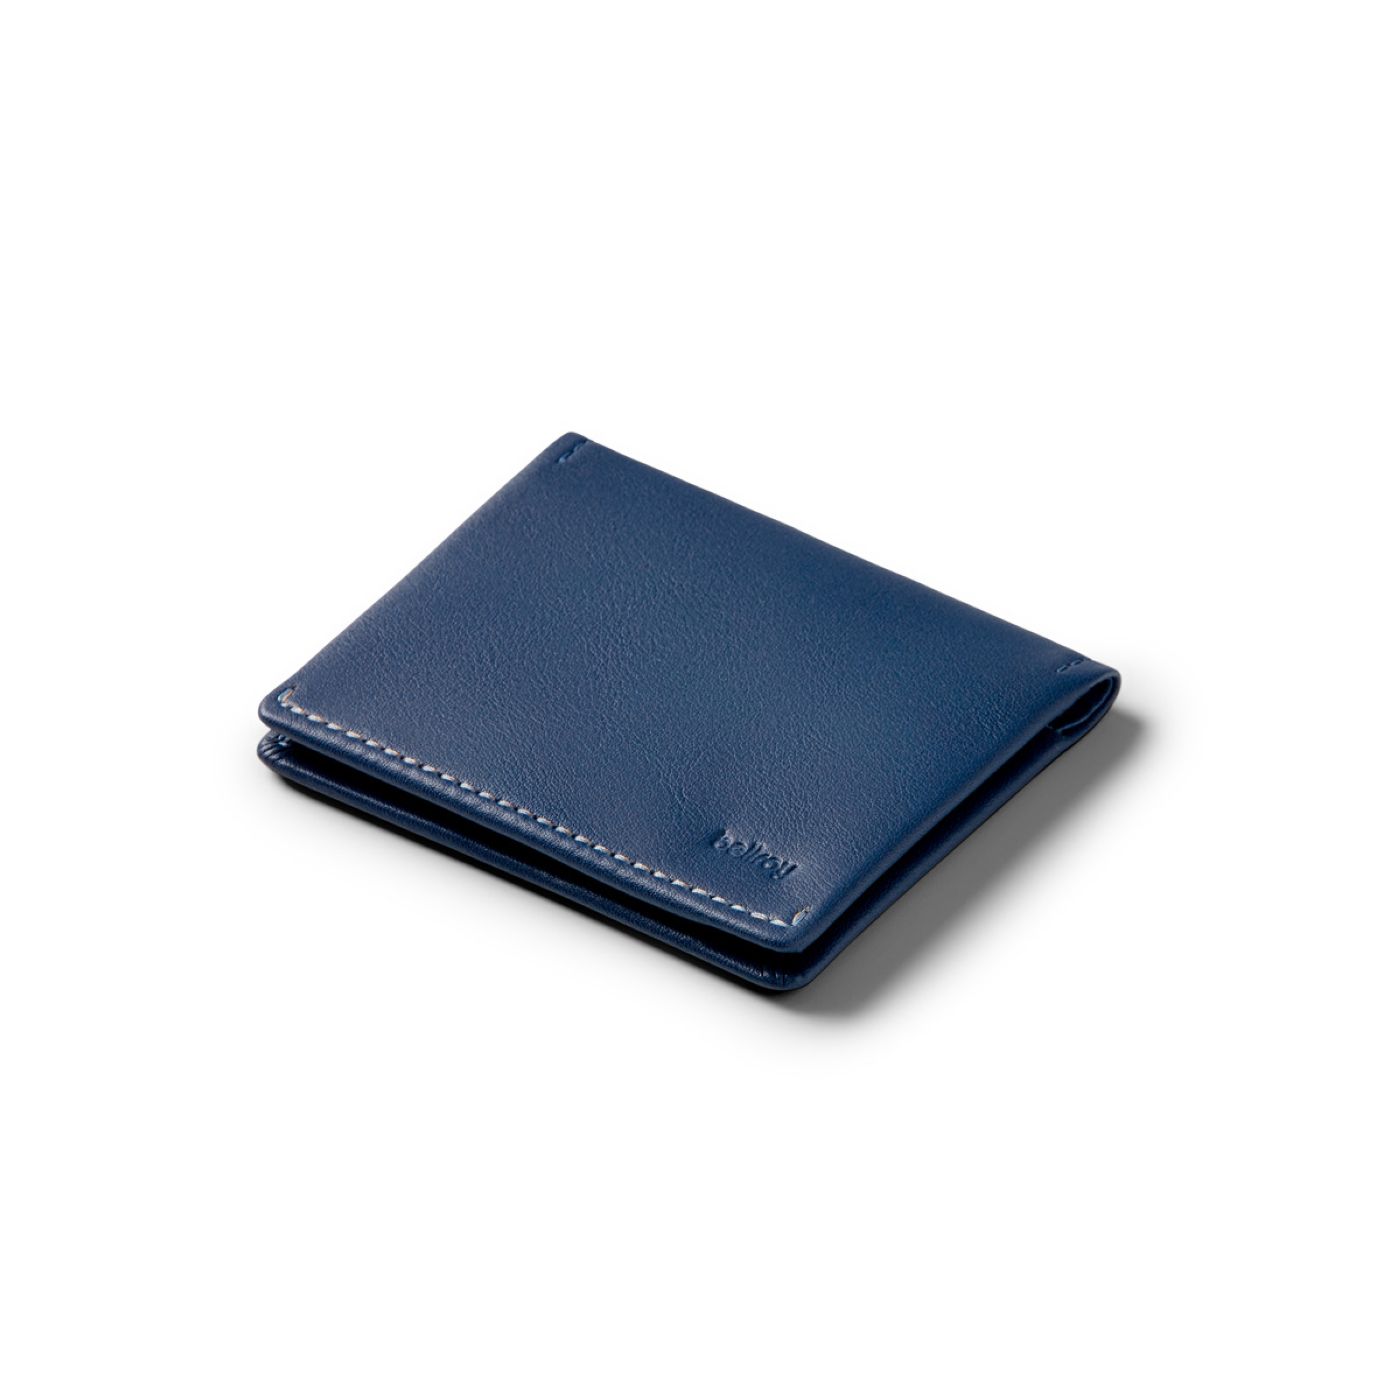 Bellroy Wallet Malaysia Price